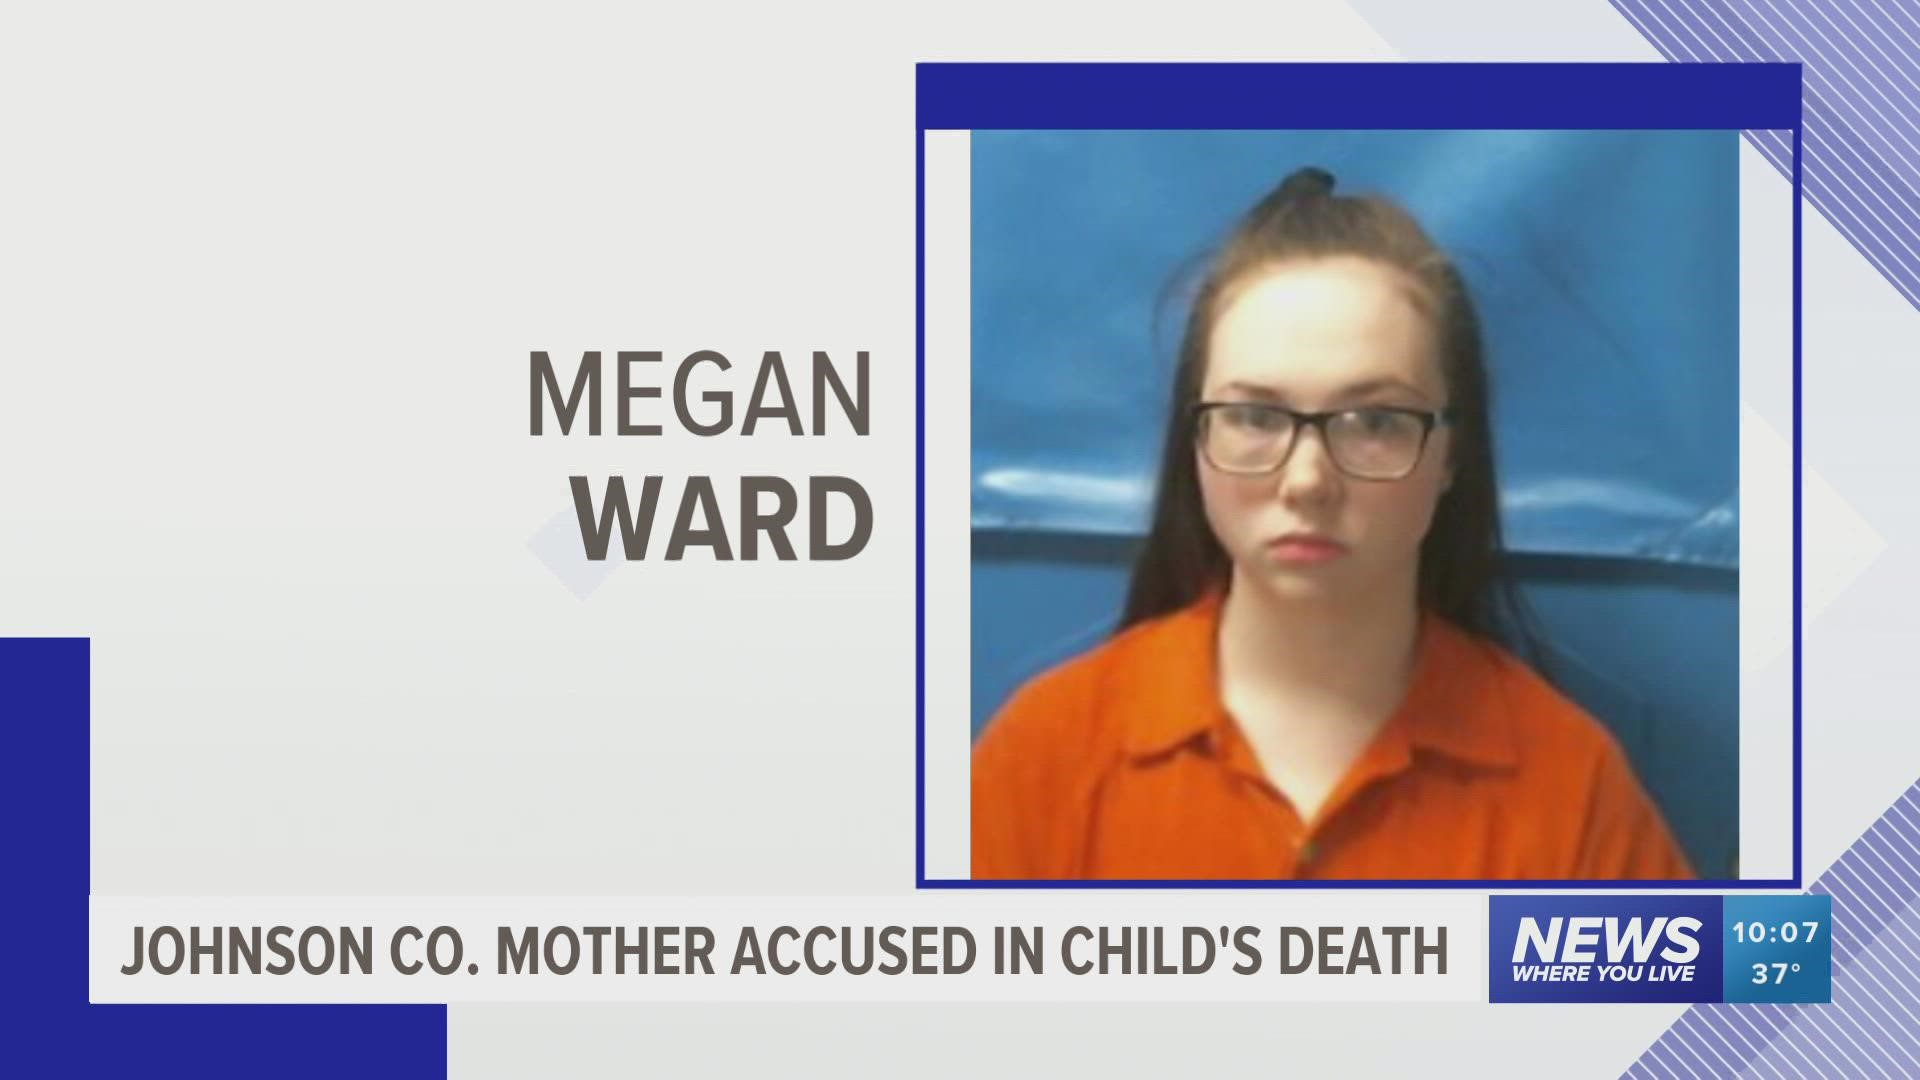 A mother and her boyfriend have been arrested in connection to the death of a 2-month-old baby.